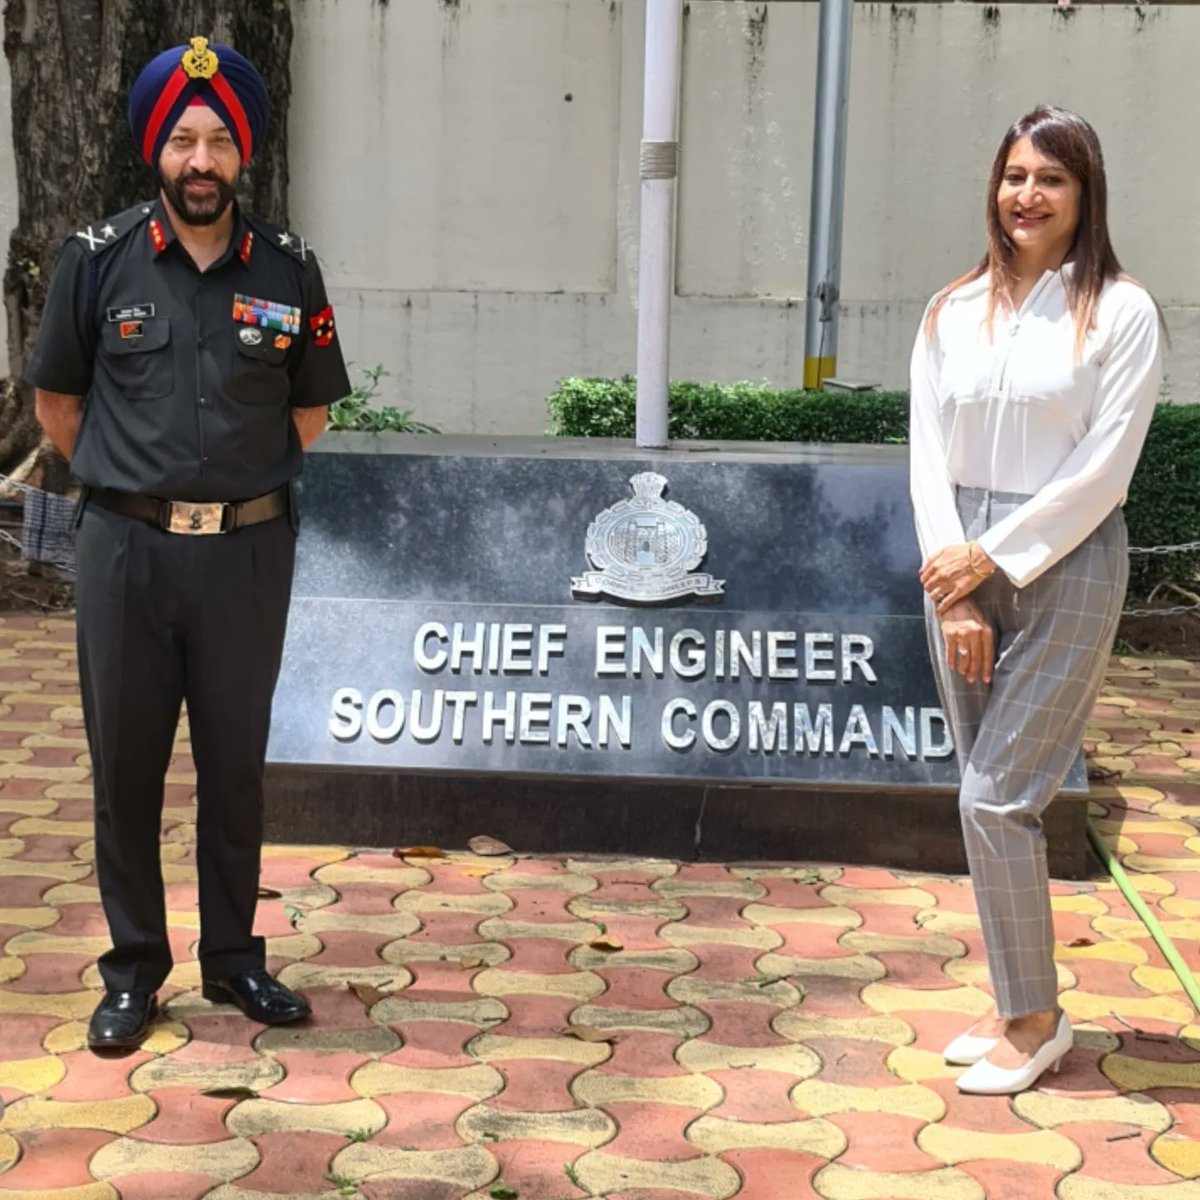 Nothing can be better than wishing CHIEF ENGINEER- SOUTHERN COMMAND,  Happy Engineer’s Day!   on #EngineersDay2022

Wishing all engineers,
Happy Engineer’s Day! 
The modern world would not have been possible without your inventions!
You are  rockstar of the modern world!